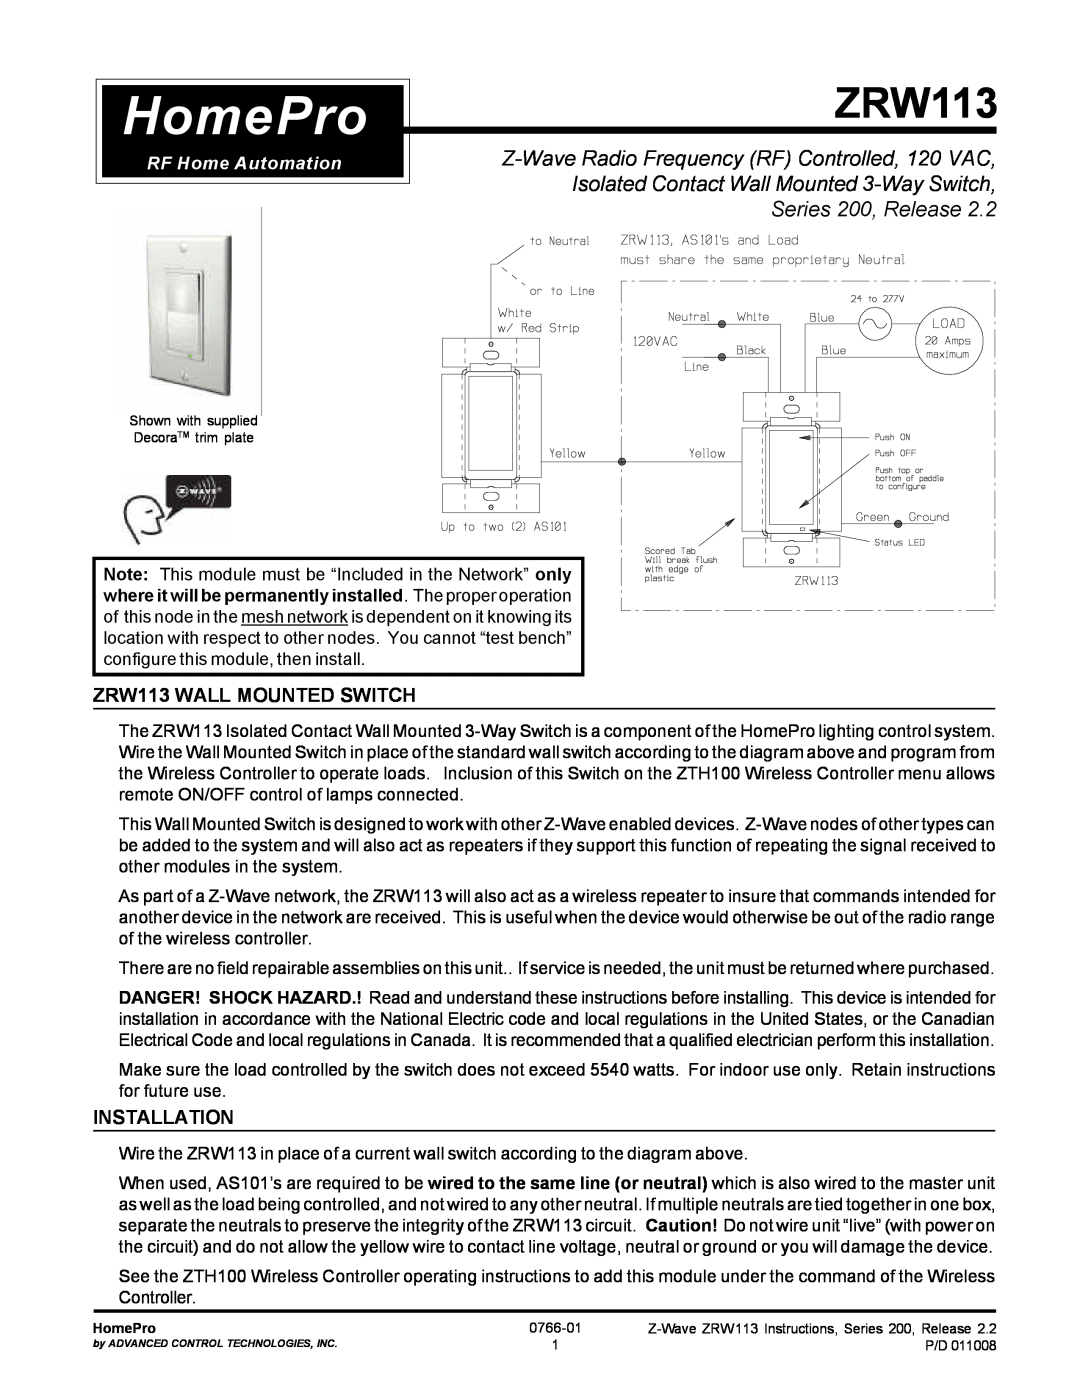 ADTX operating instructions ZRW113 WALL MOUNTED SWITCH, Installation, HomePro, Series 200, Release, RF Home Automation 